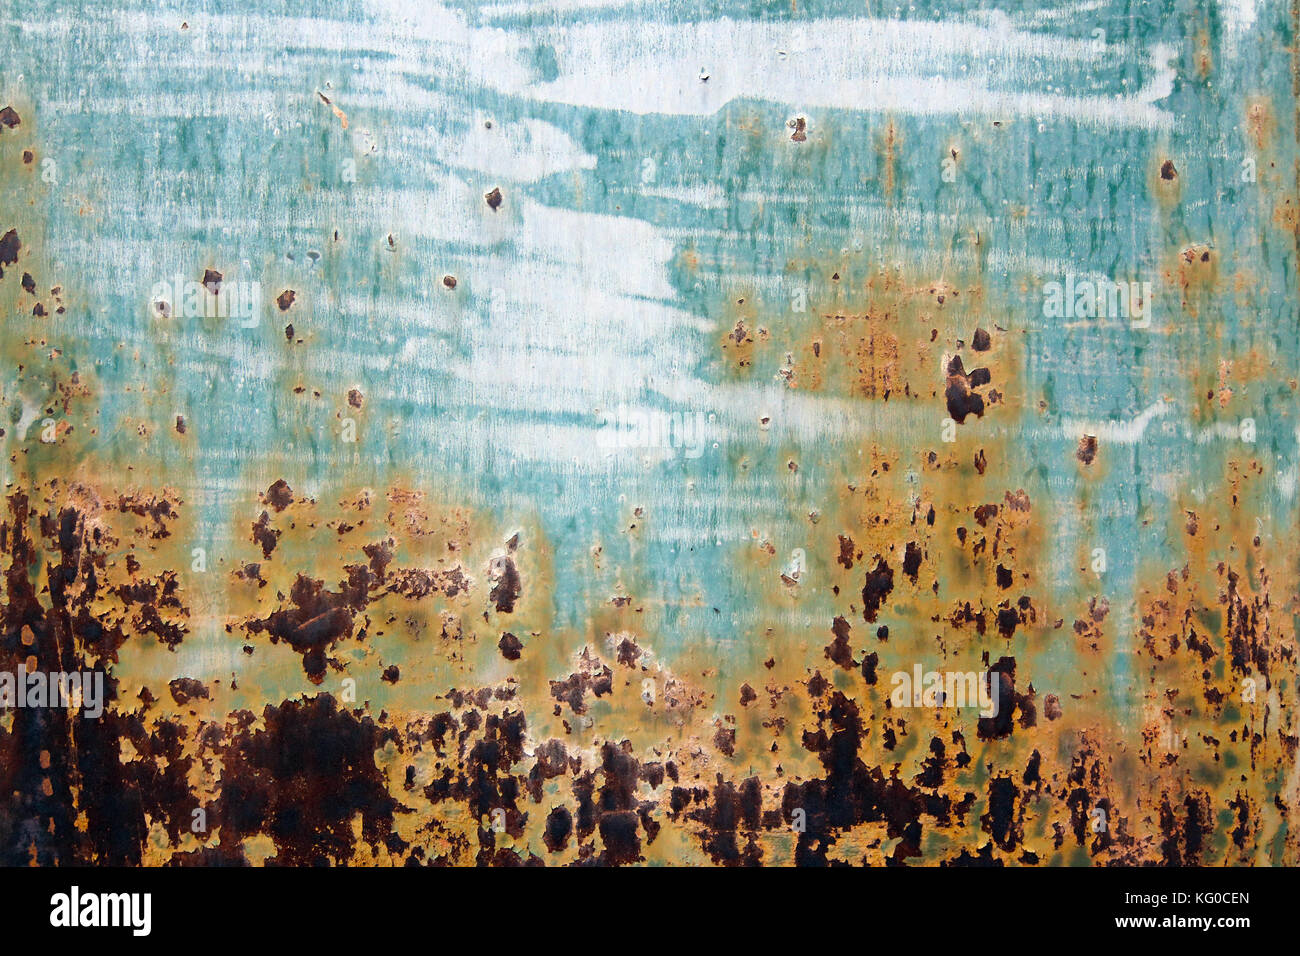 Flaking paint from the rusty metal surface Stock Photo